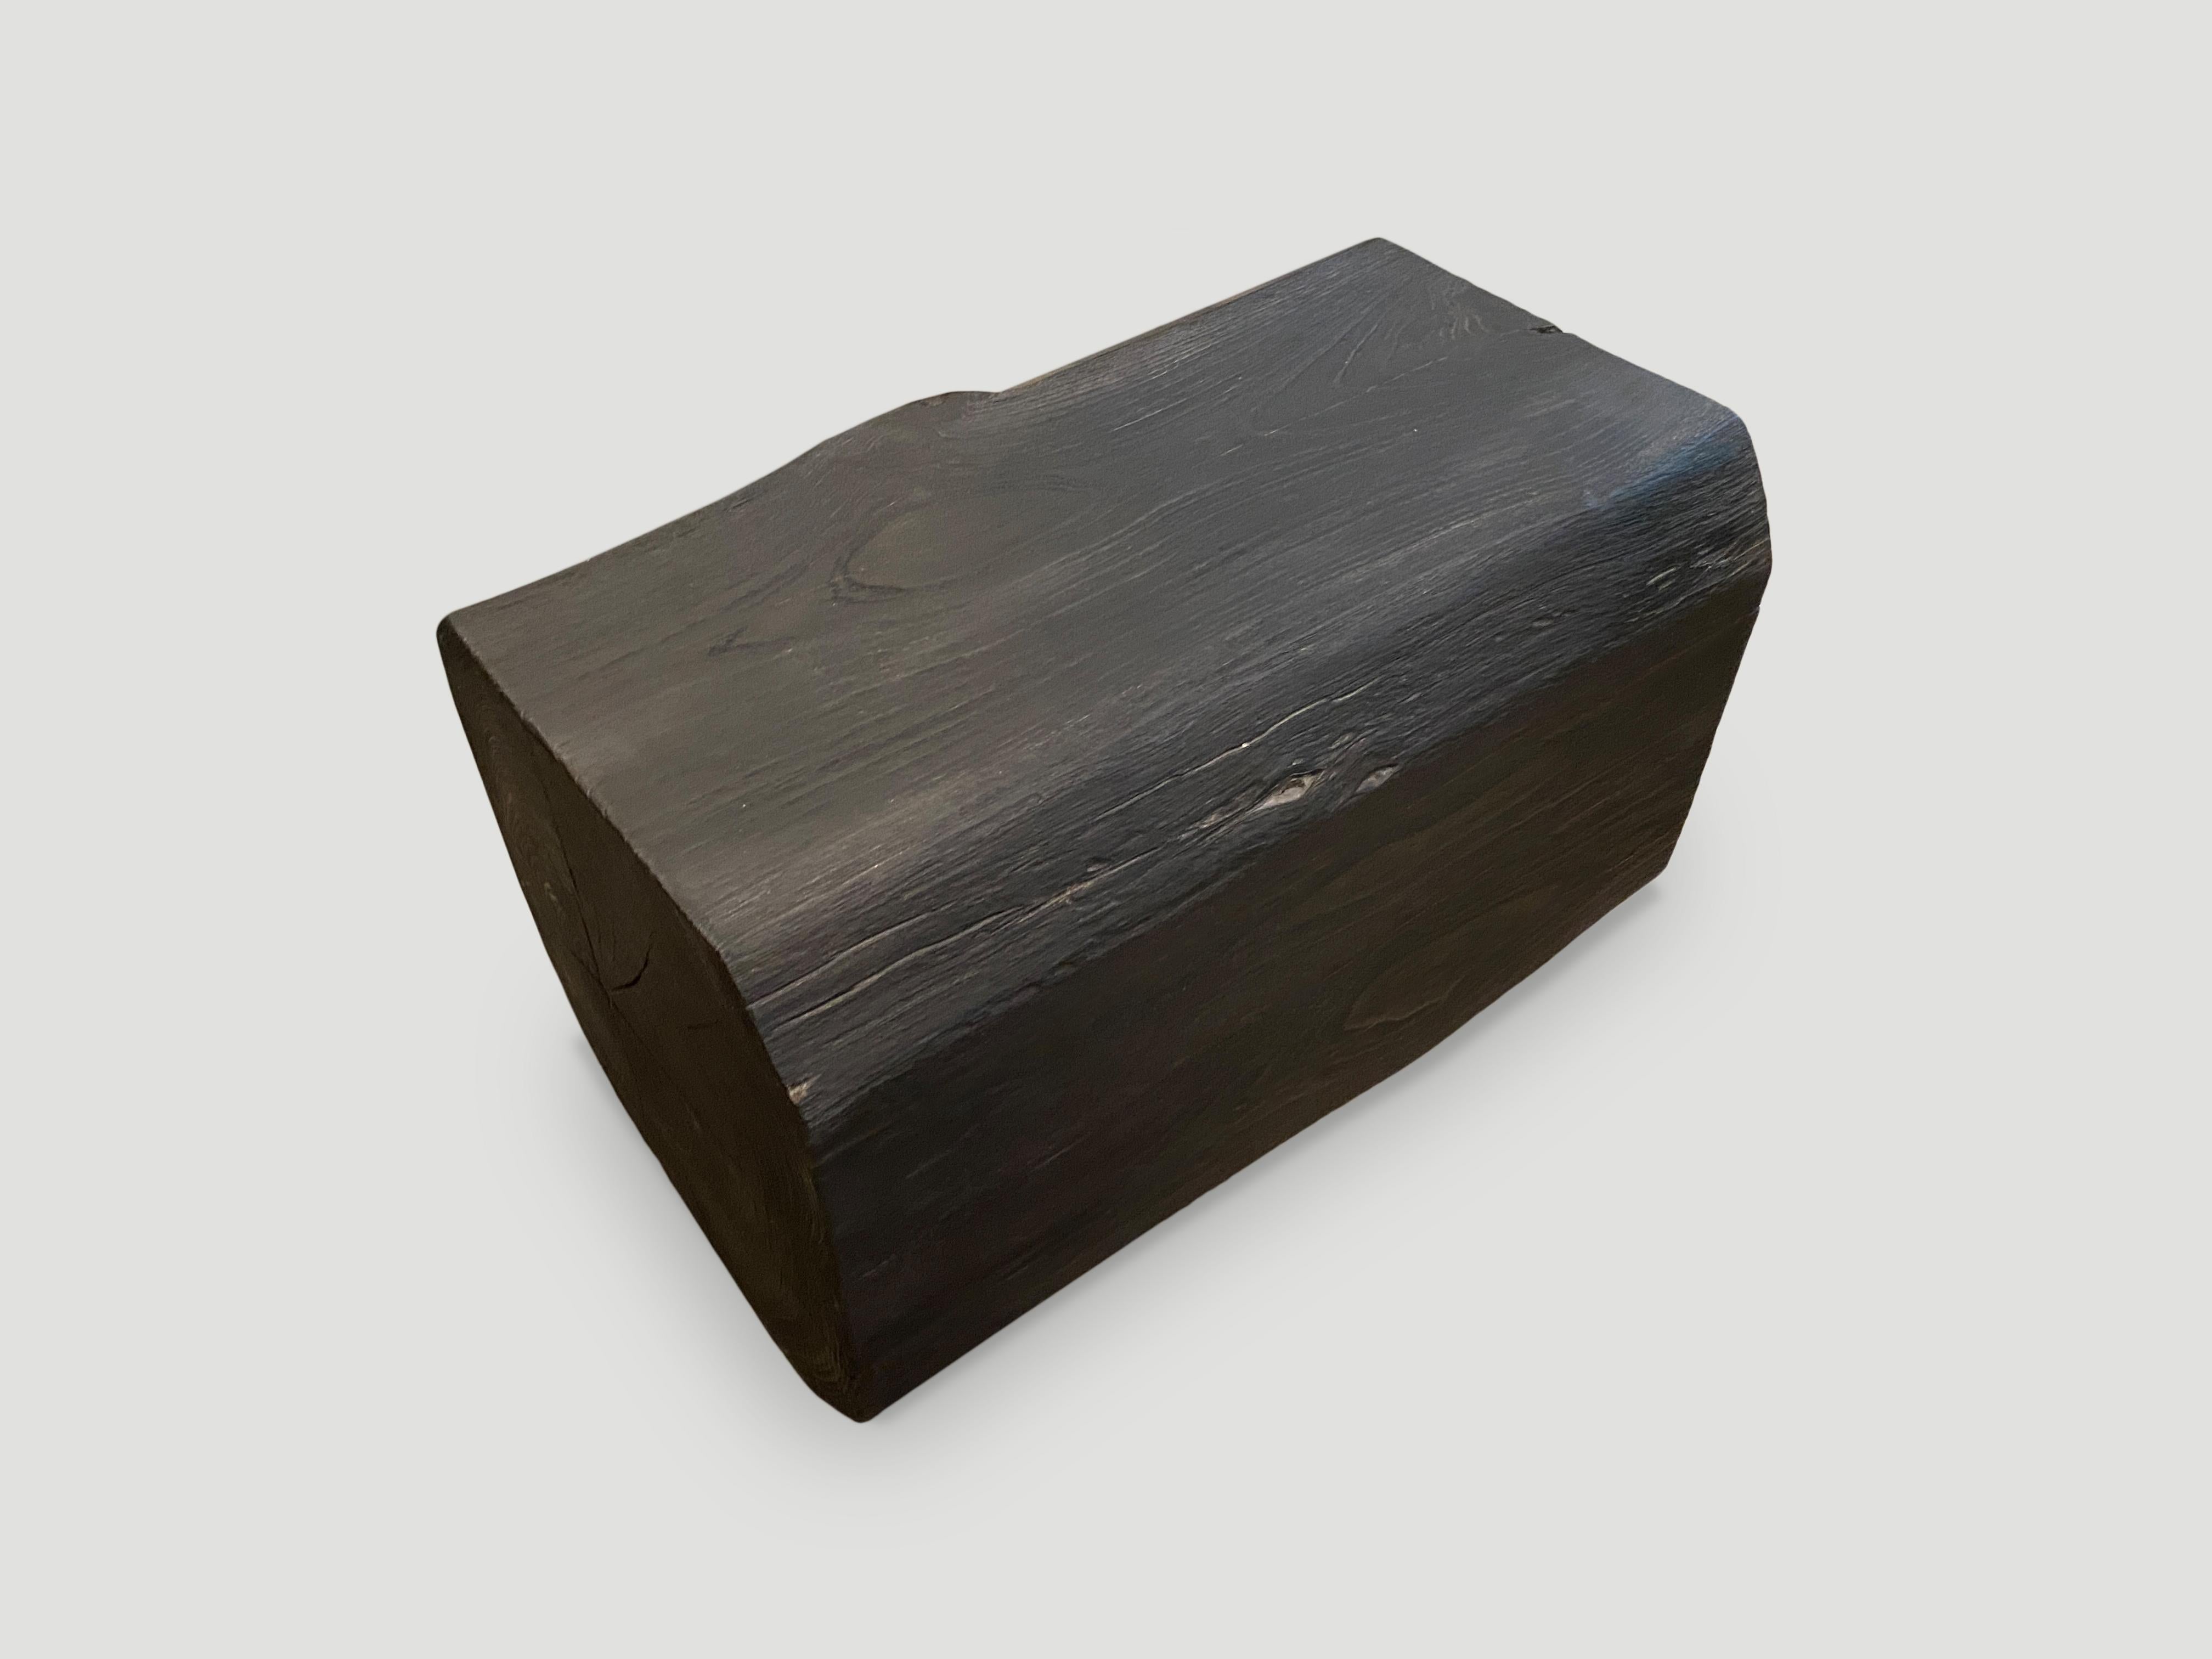 Andrianna Shamaris Charred Teak Wood Log Bench or Coffee Table In Excellent Condition For Sale In New York, NY